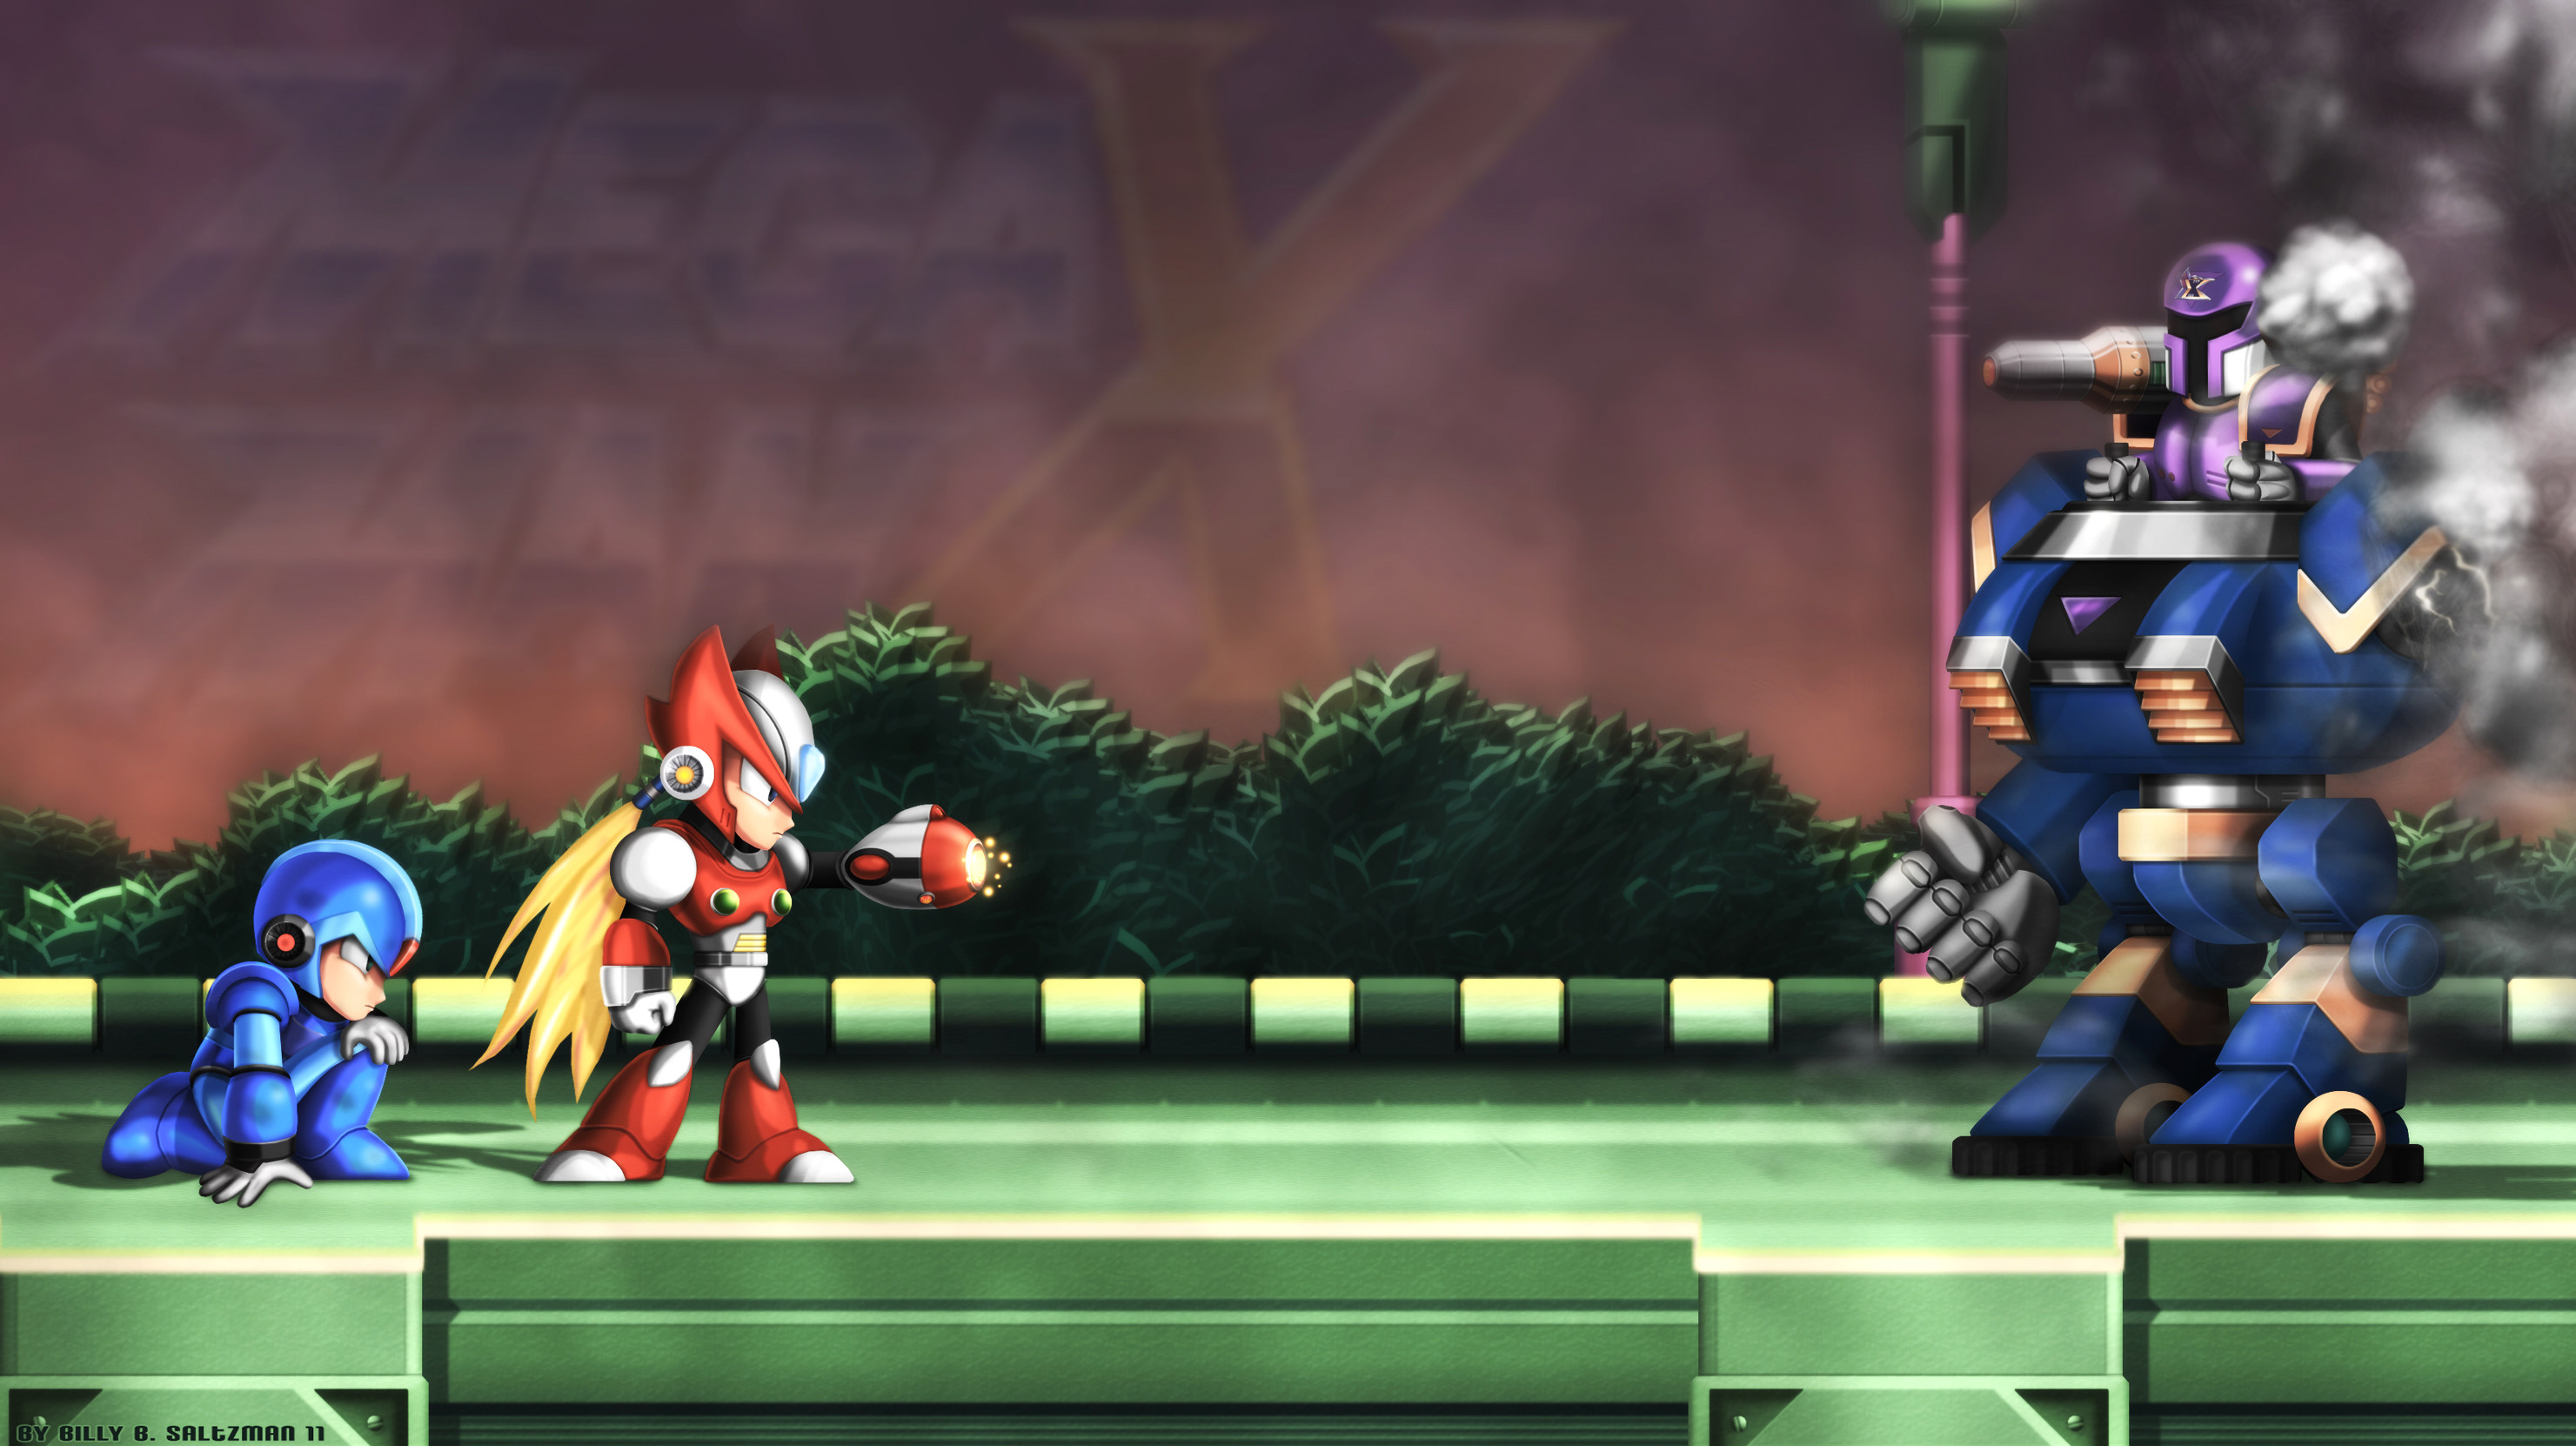 2961x1662 ... Mega Man X1 Upclose with ZX by Billysan291